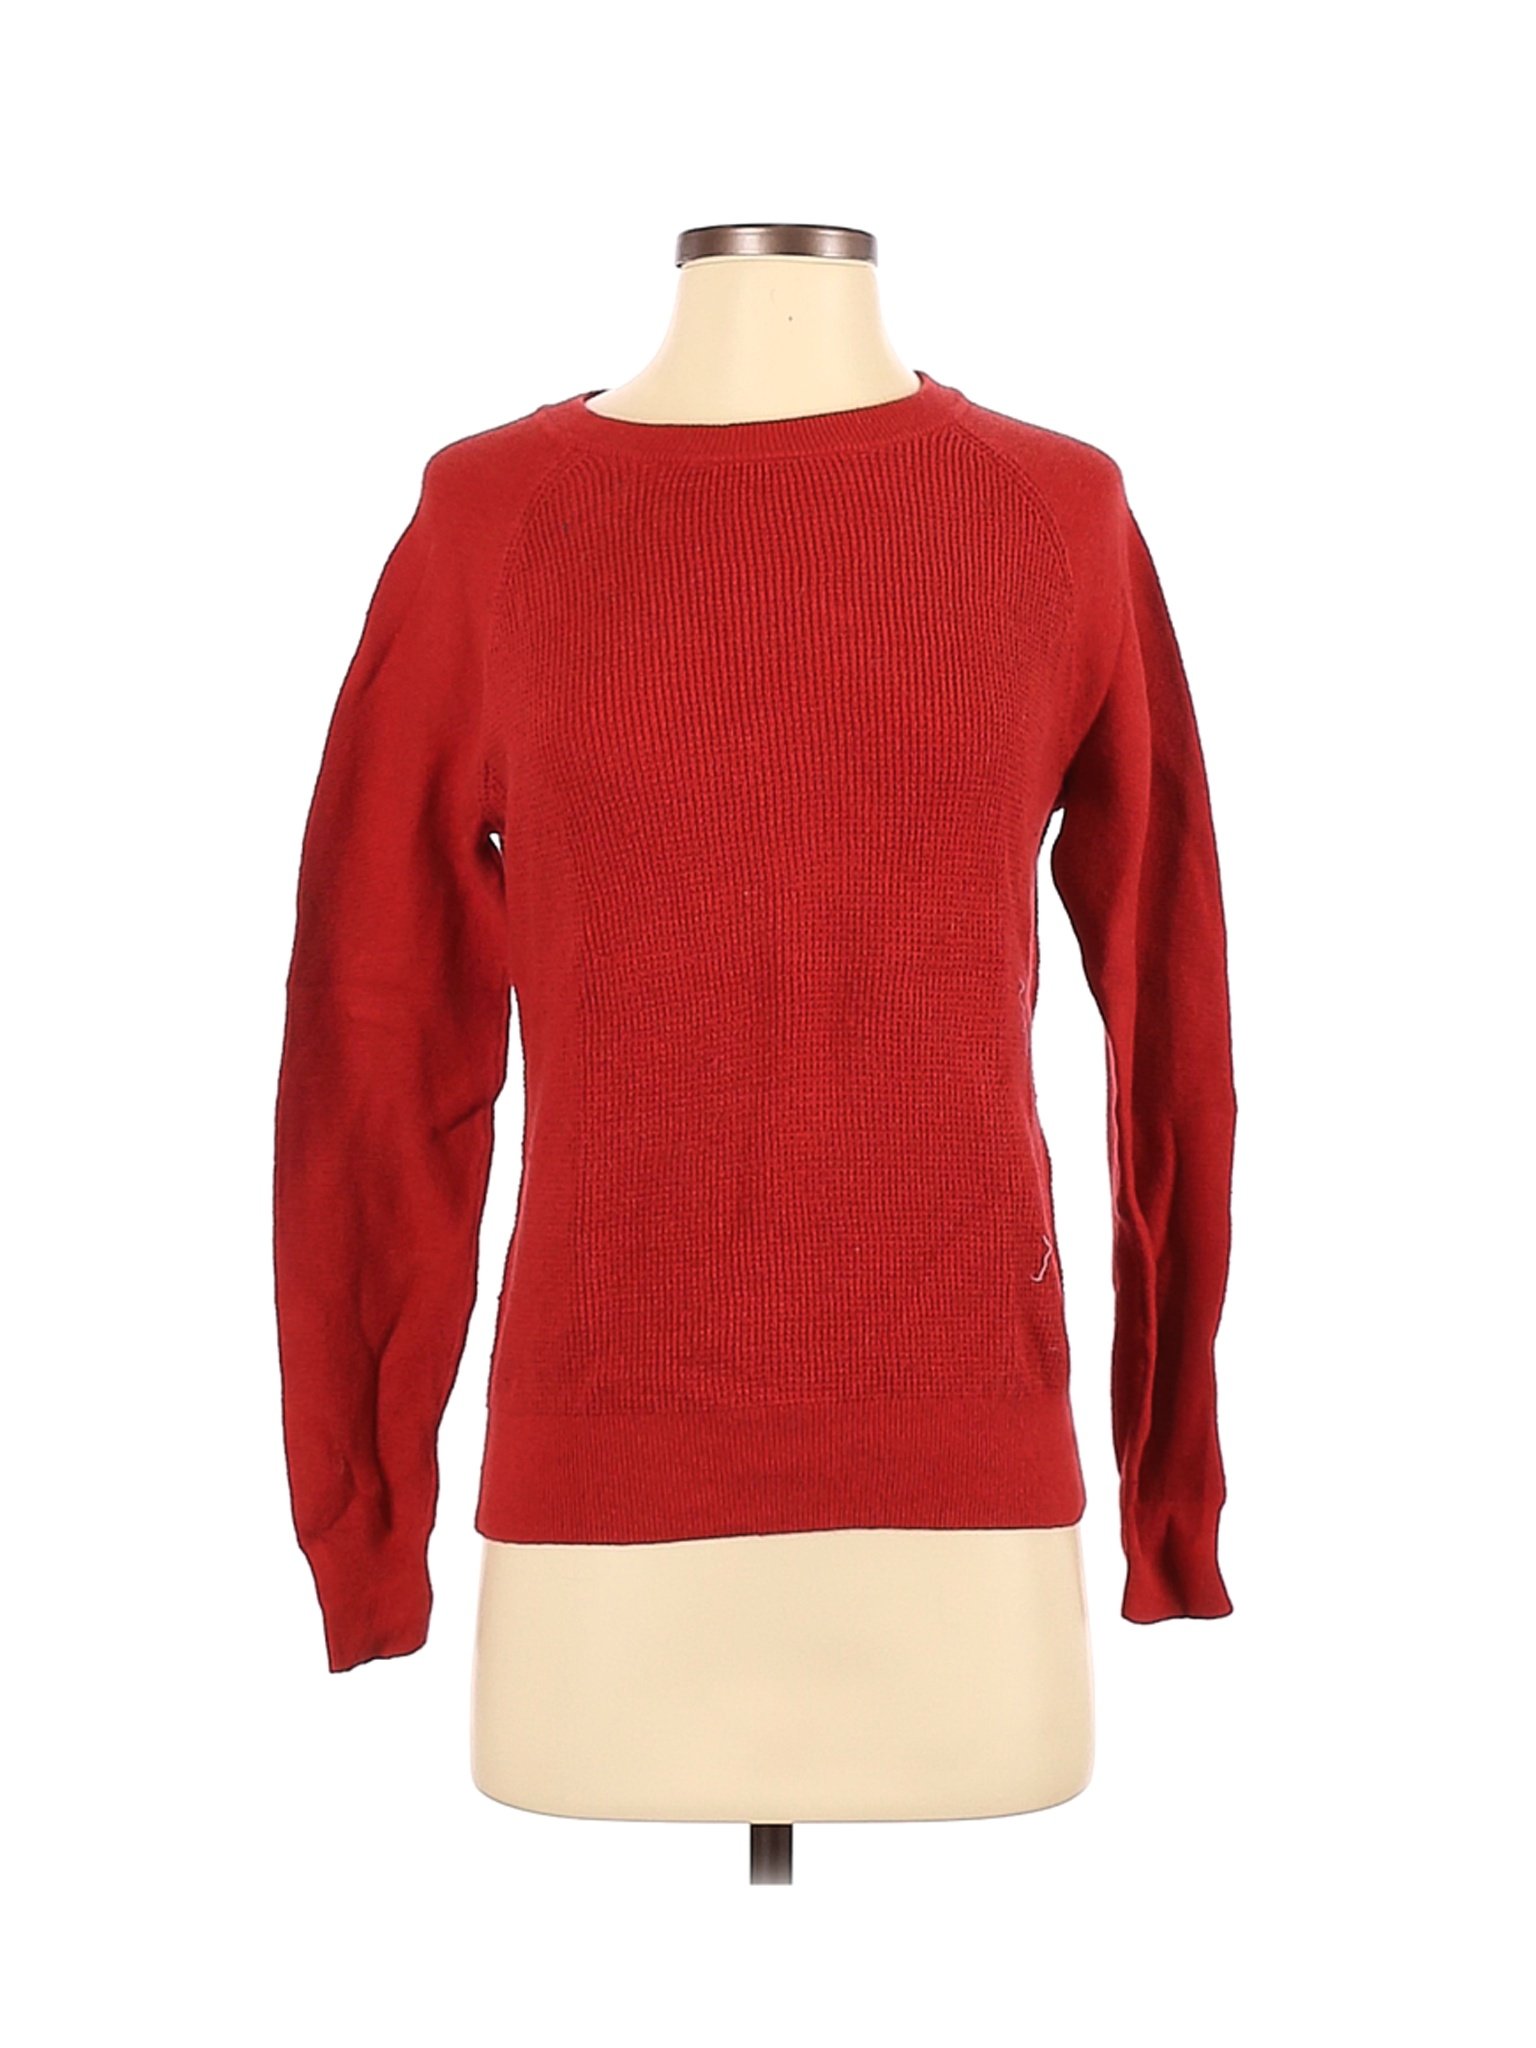 Levi's Women Red Pullover Sweater S | eBay